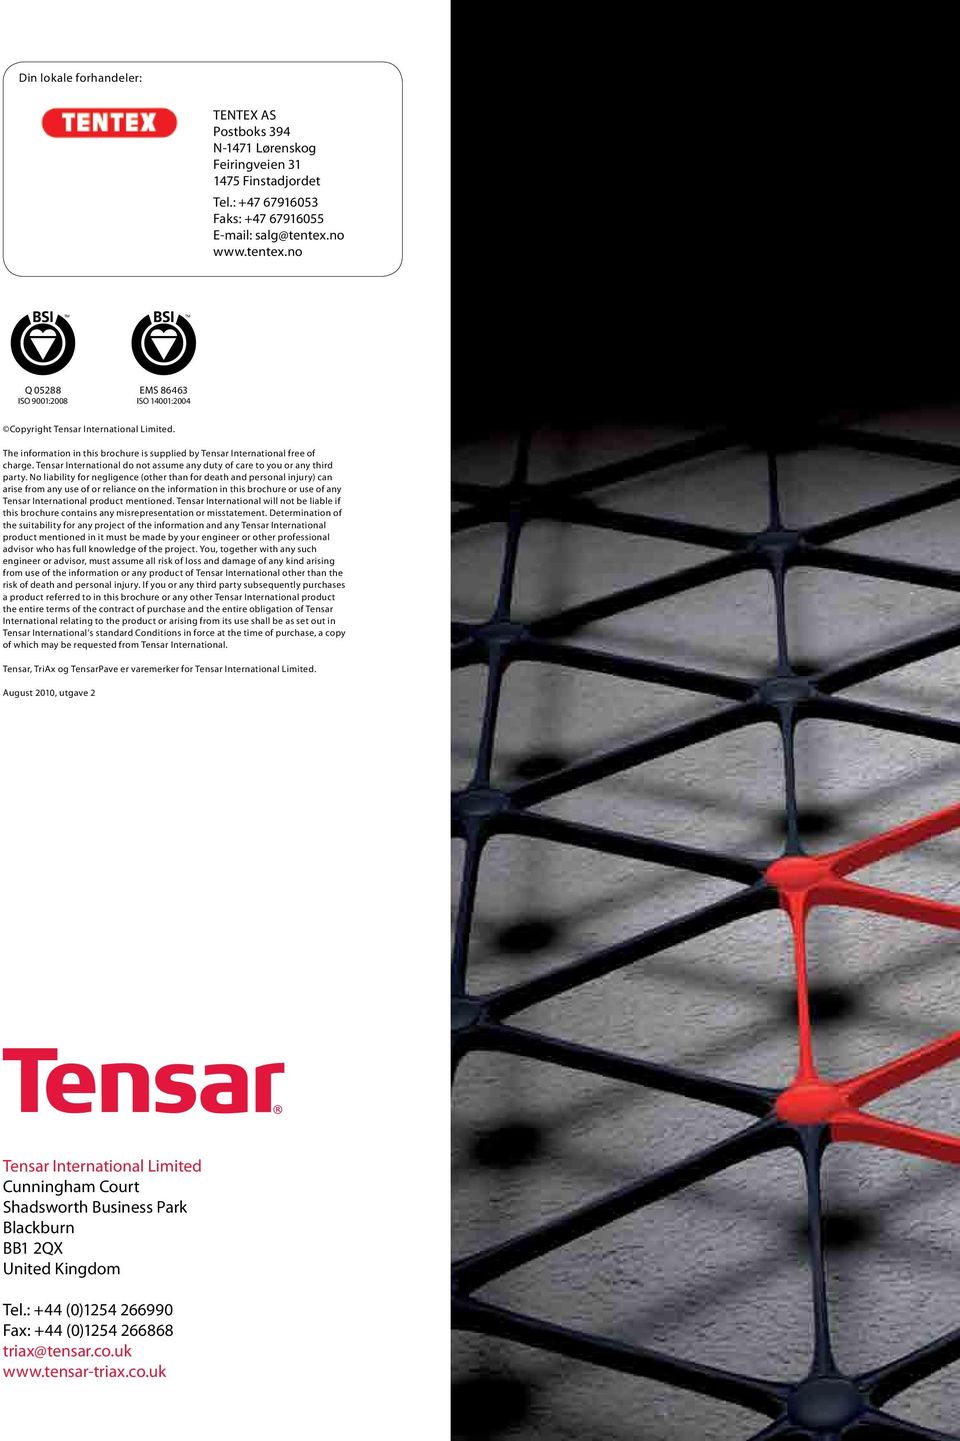 Tensar International do not assume any duty of care to you or any third party.